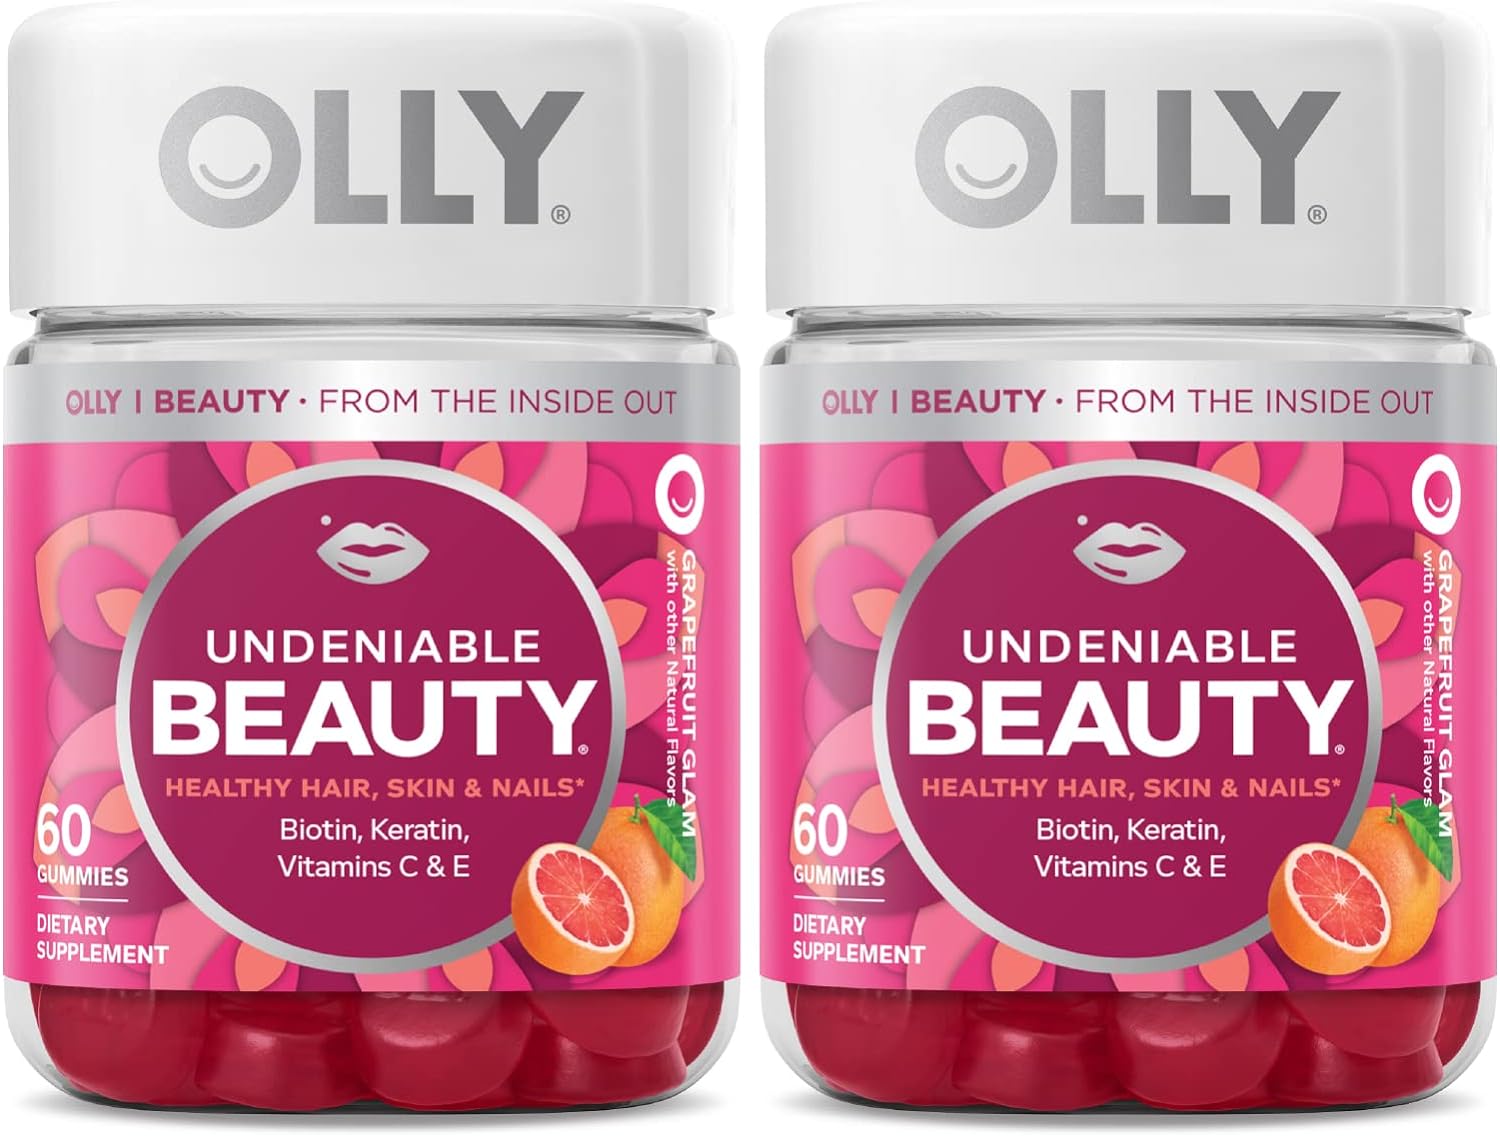 Olly Undeniable Beauty Gummy, For Hair, Skin, Nails, Biotin, Vitamin C, Keratin, Chewable Supplement, Grapefruit, 30 Day Supply - 60 Count